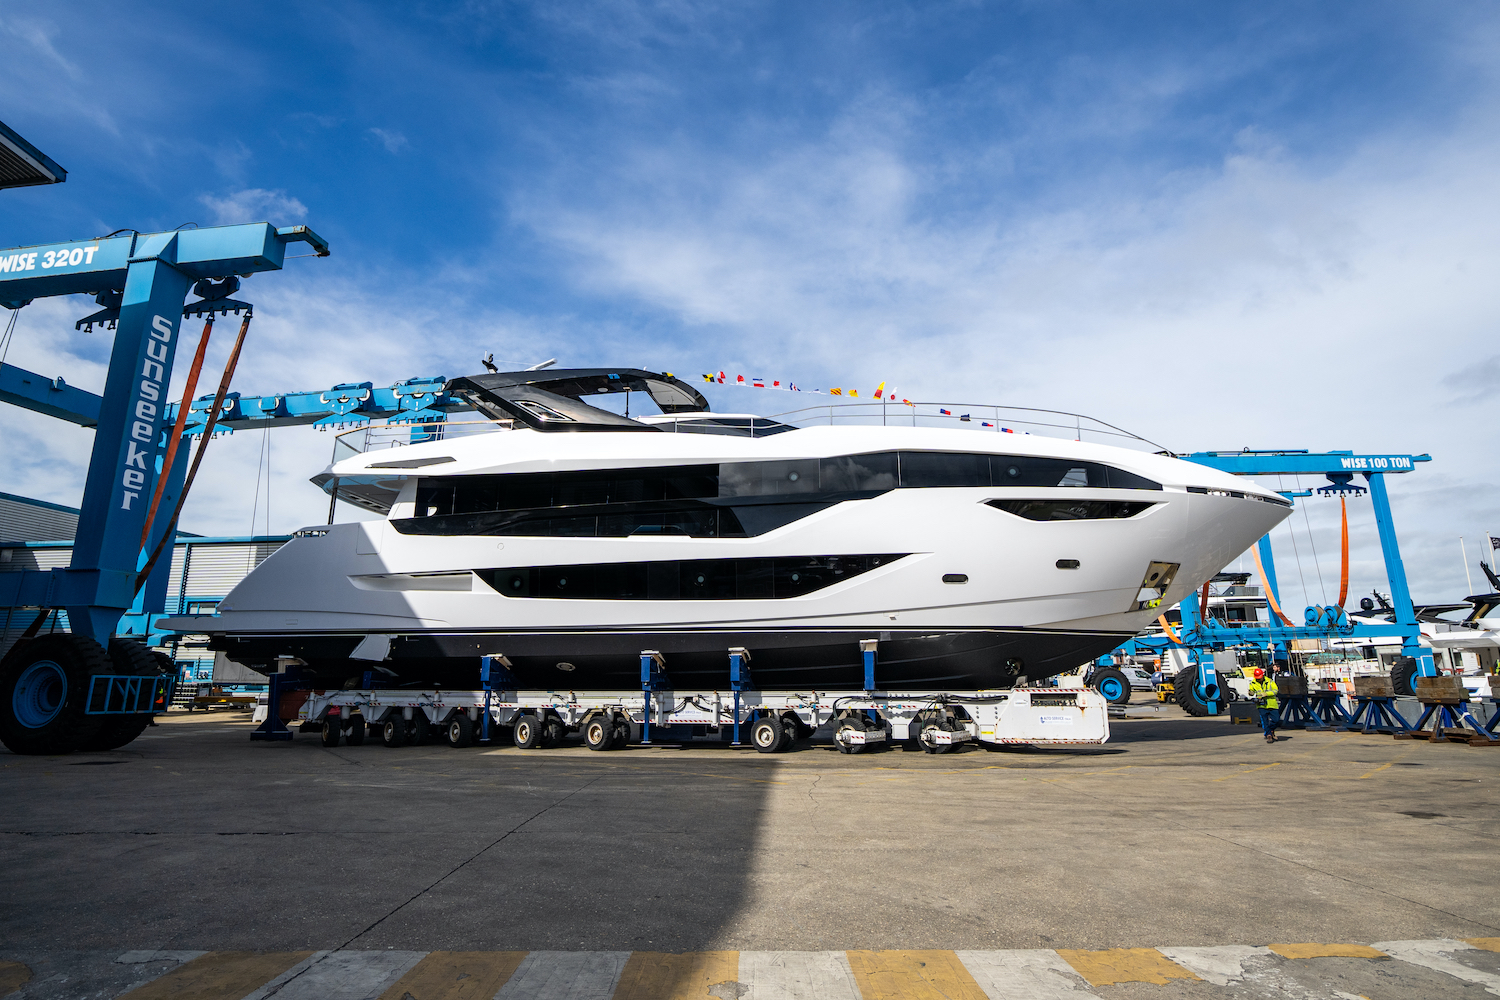 Sunseeker to Debut Two Models at Cannes Yachting Festival